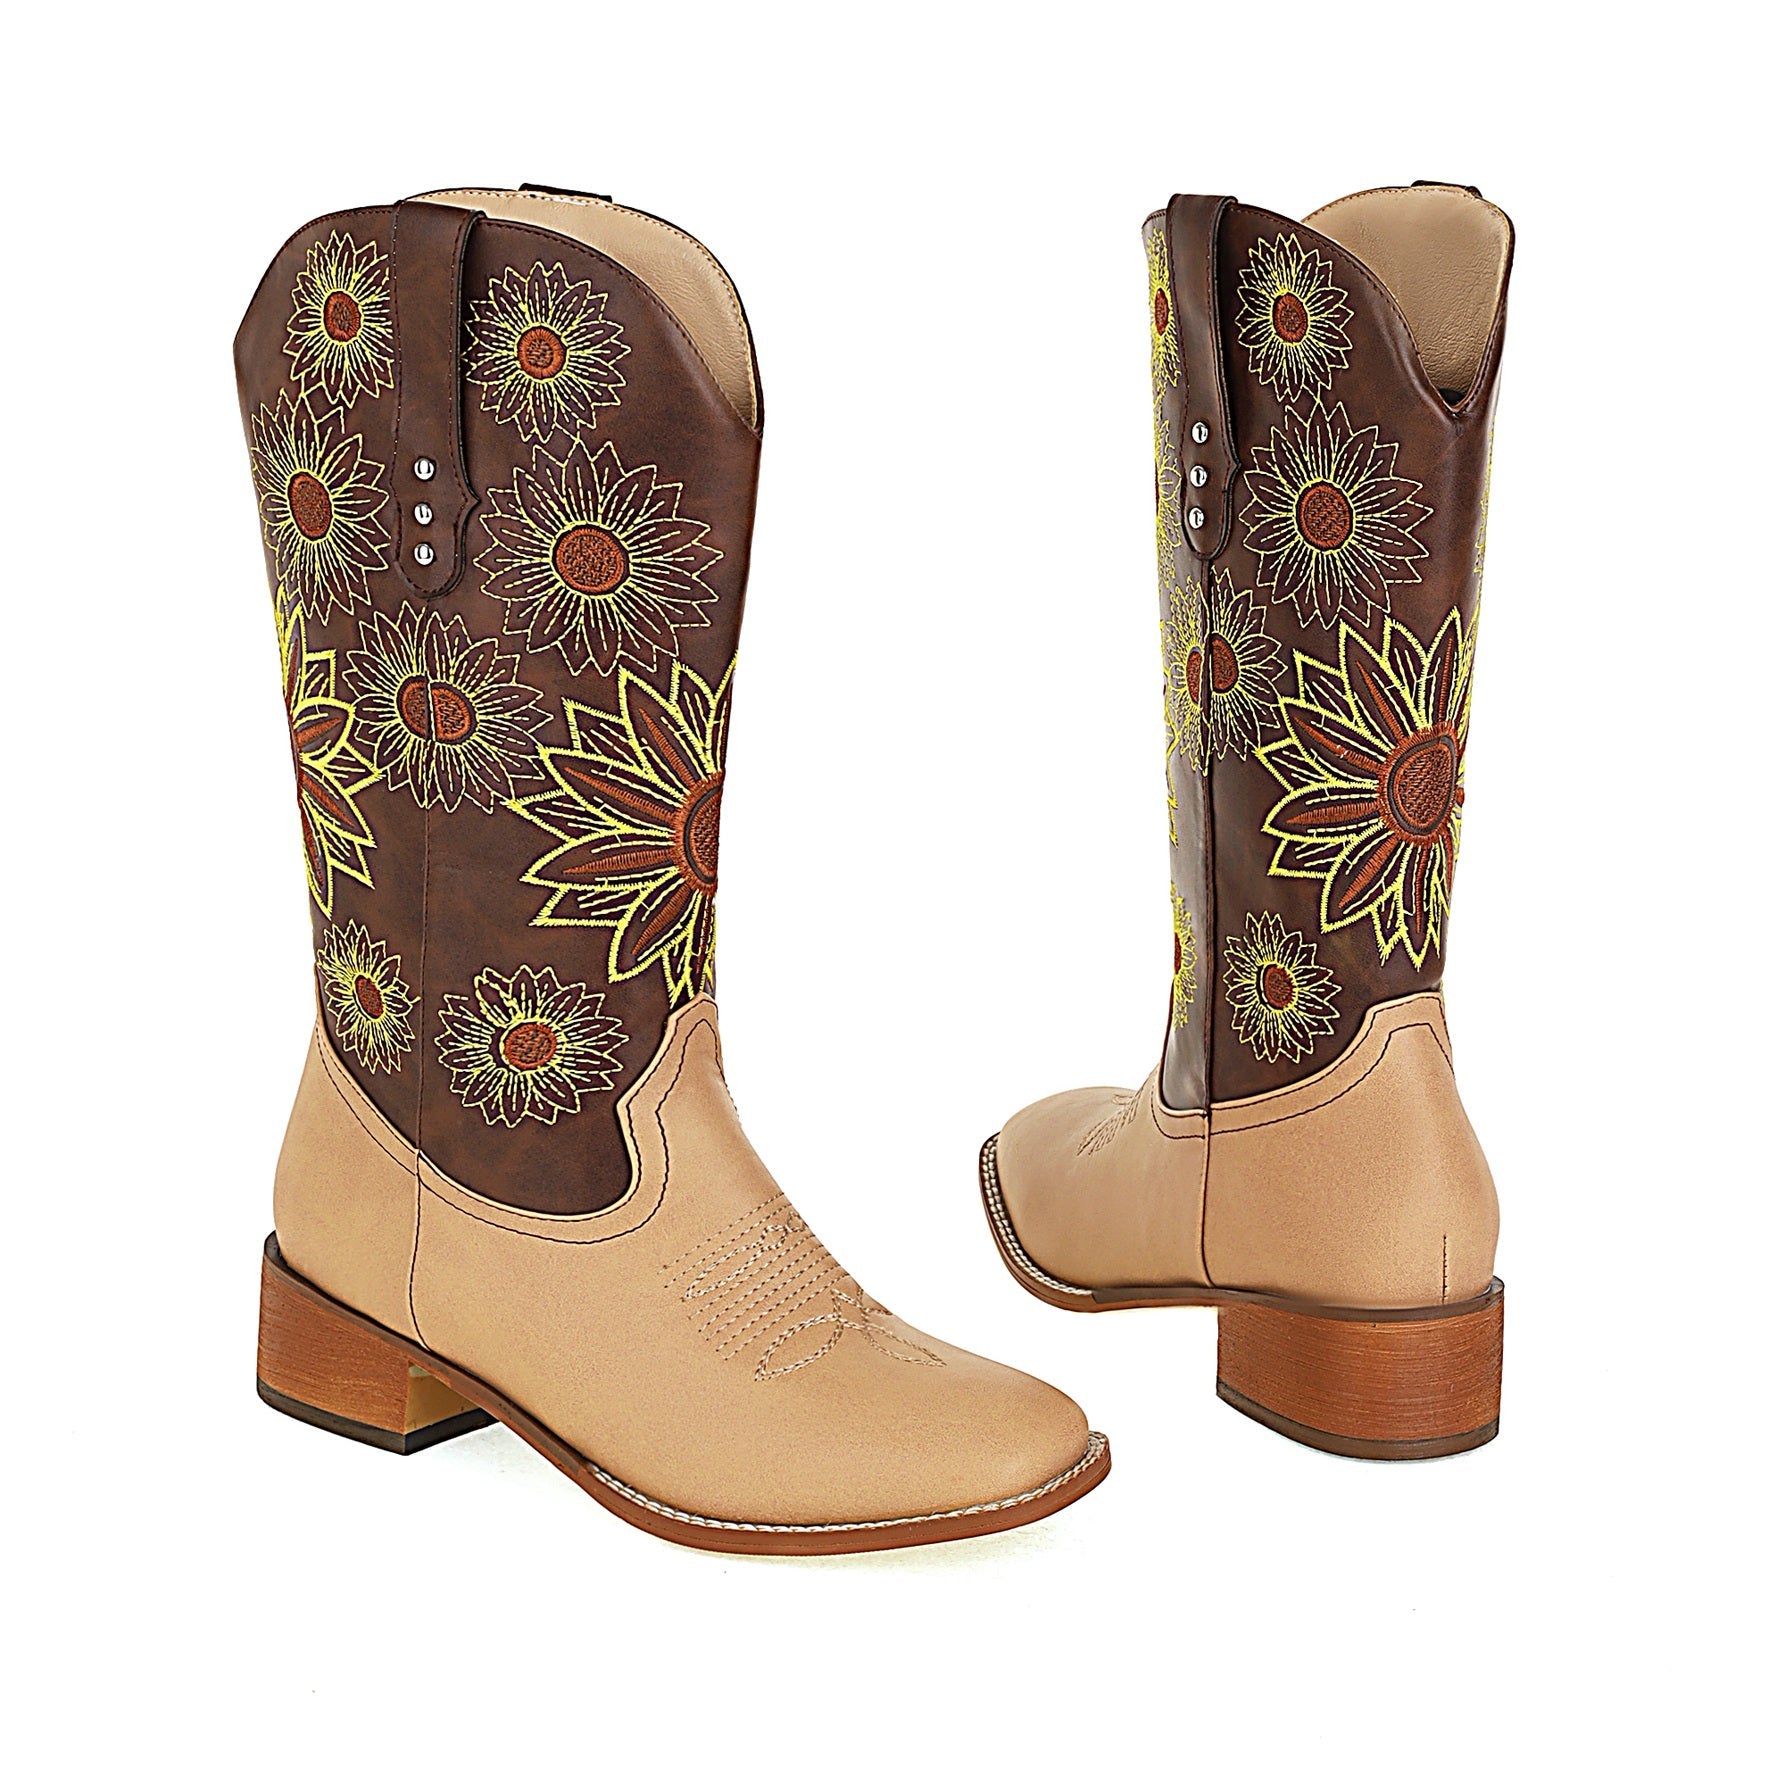 Bigsizeheels Western vintage Sunflower embroidery boots - Pale brown freeshipping - bigsizeheel®-size5-size15 -All Plus Sizes Available!